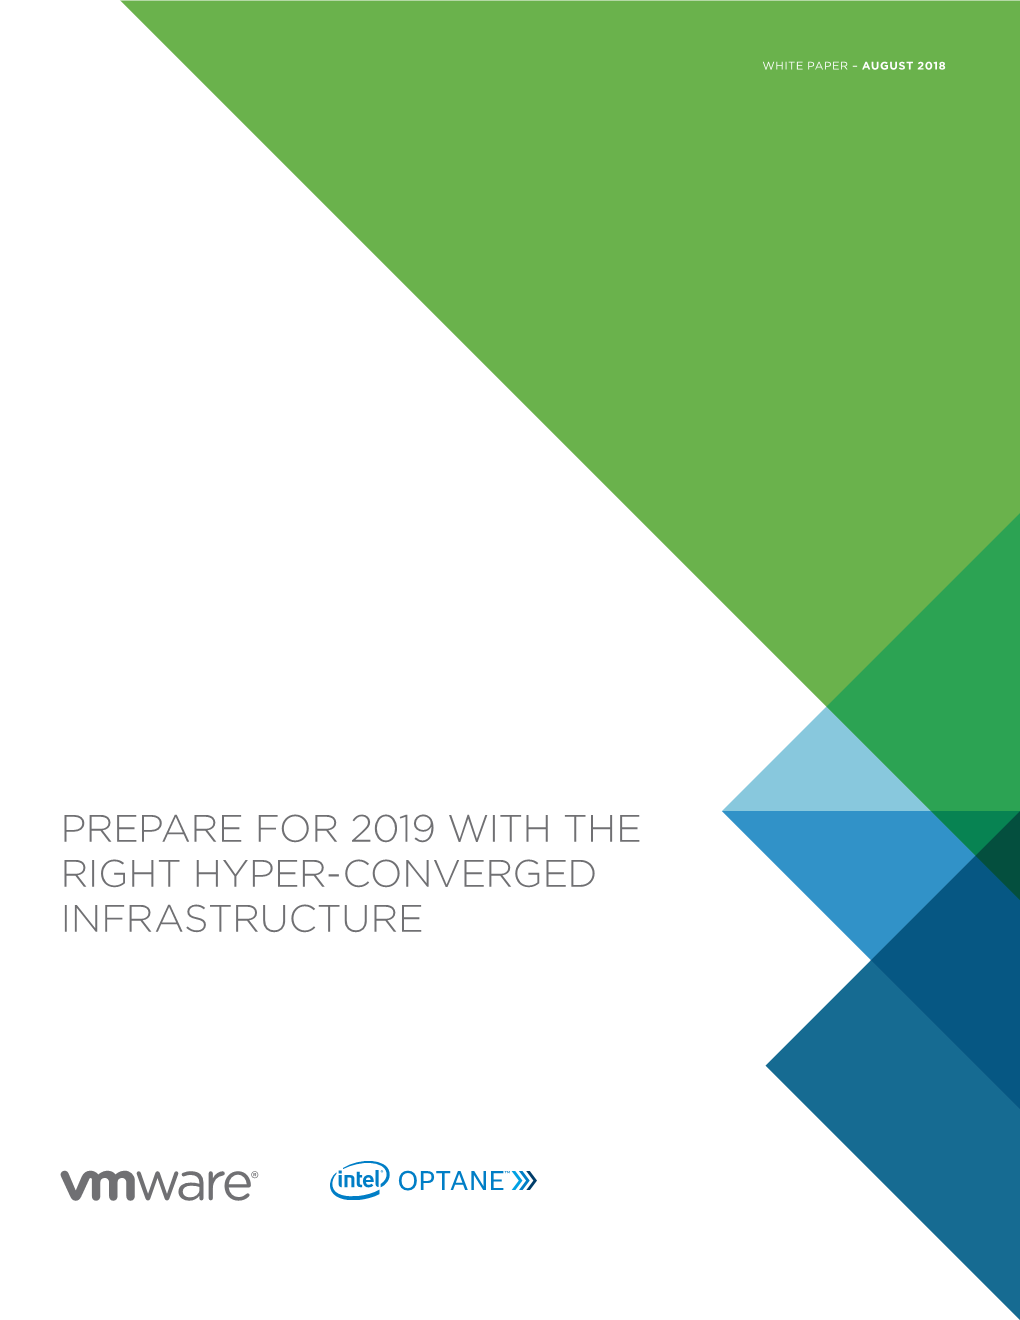 Prepare for 2019 with the Right Hyper-Converged Infrastructure Prepare for 2019 with the Right Hyper-Converged Infrastructure